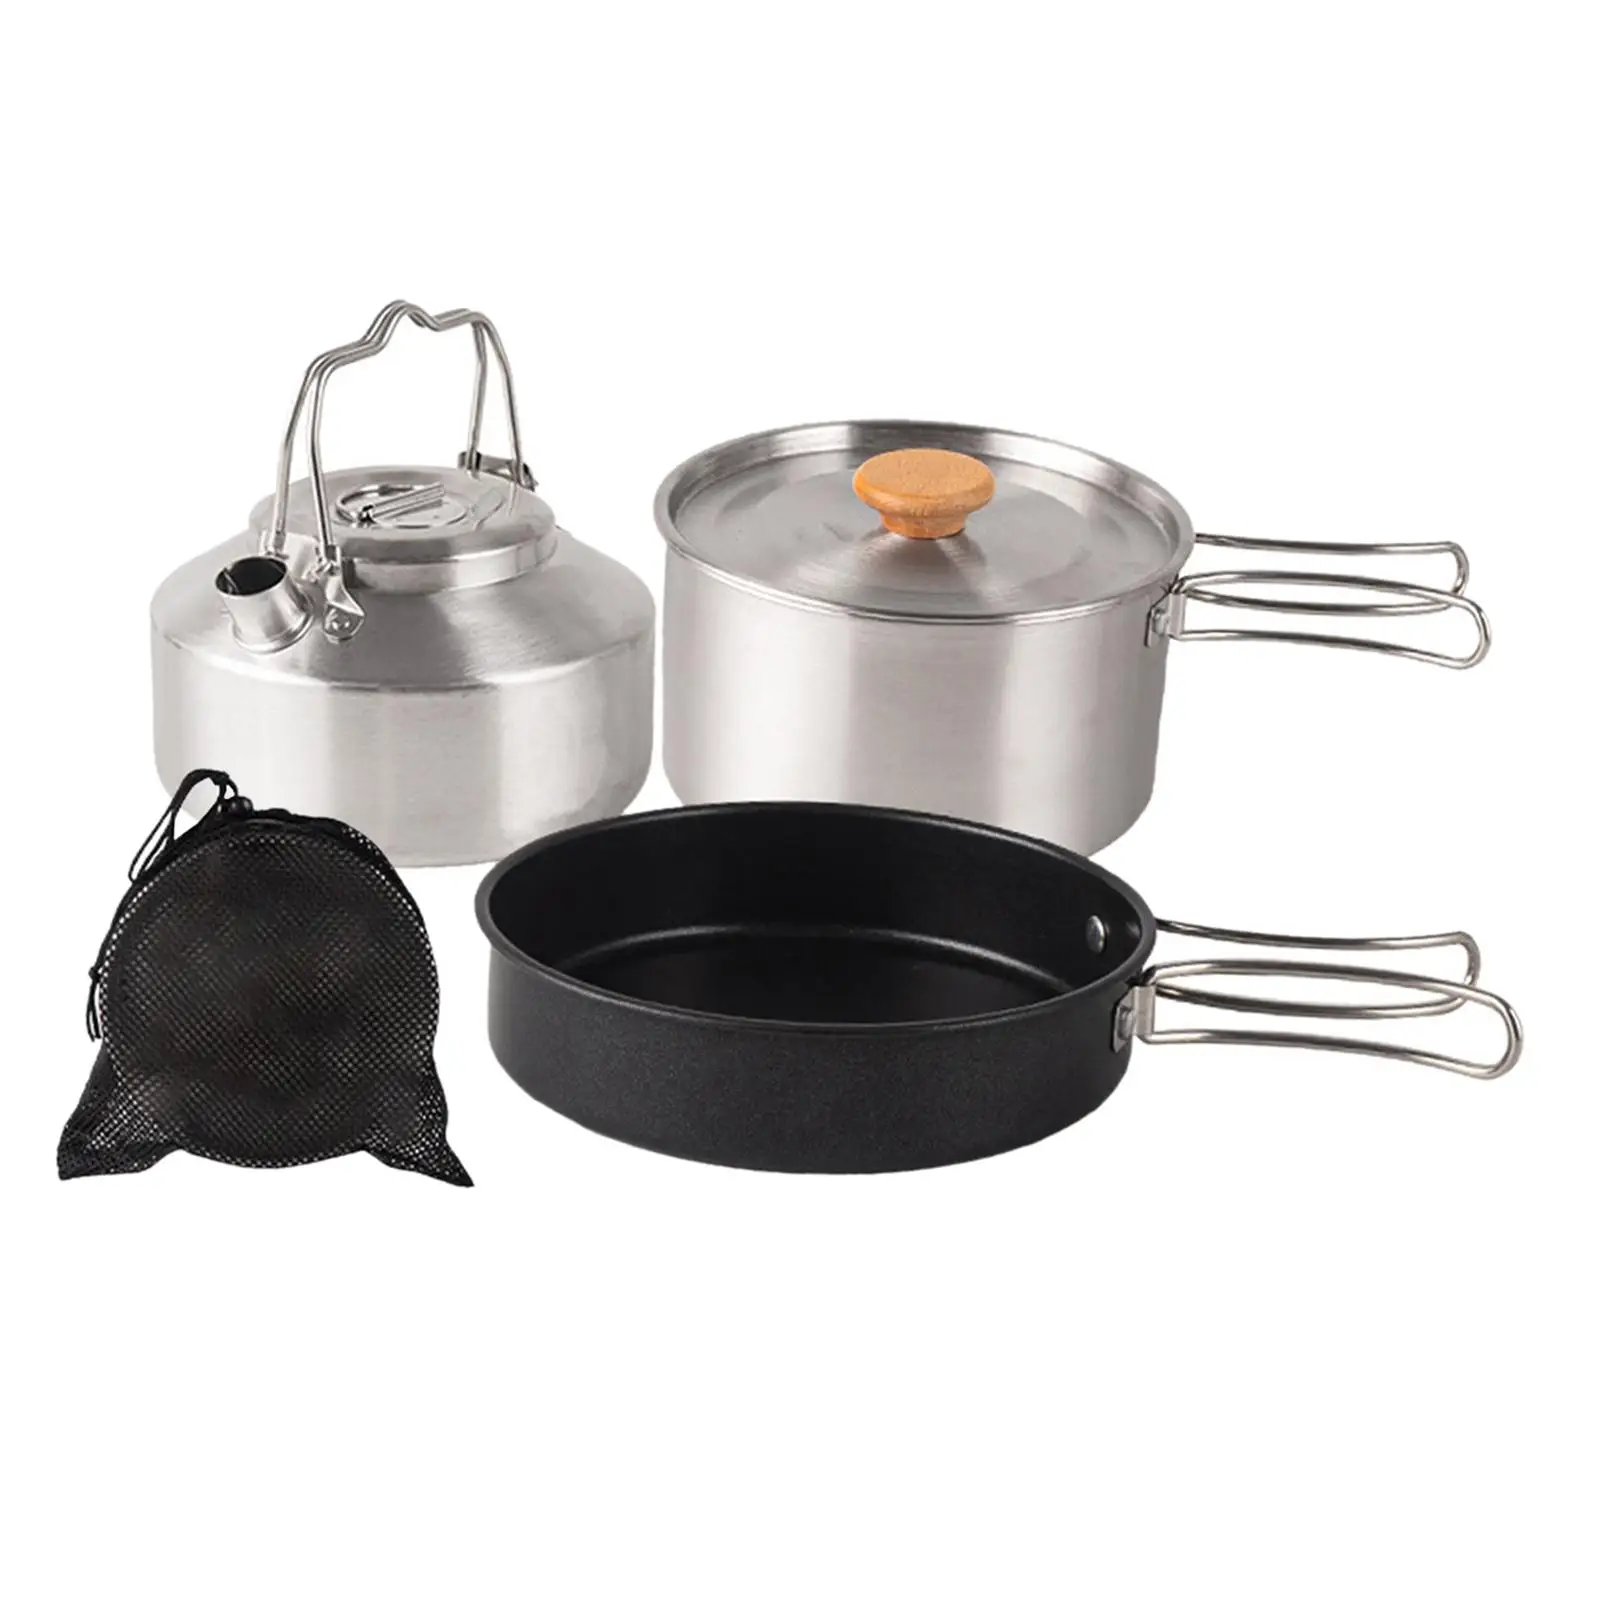 Camping Cookware Set, Outdoor Cook Gear with Storage Bag Stainless Steel Camping